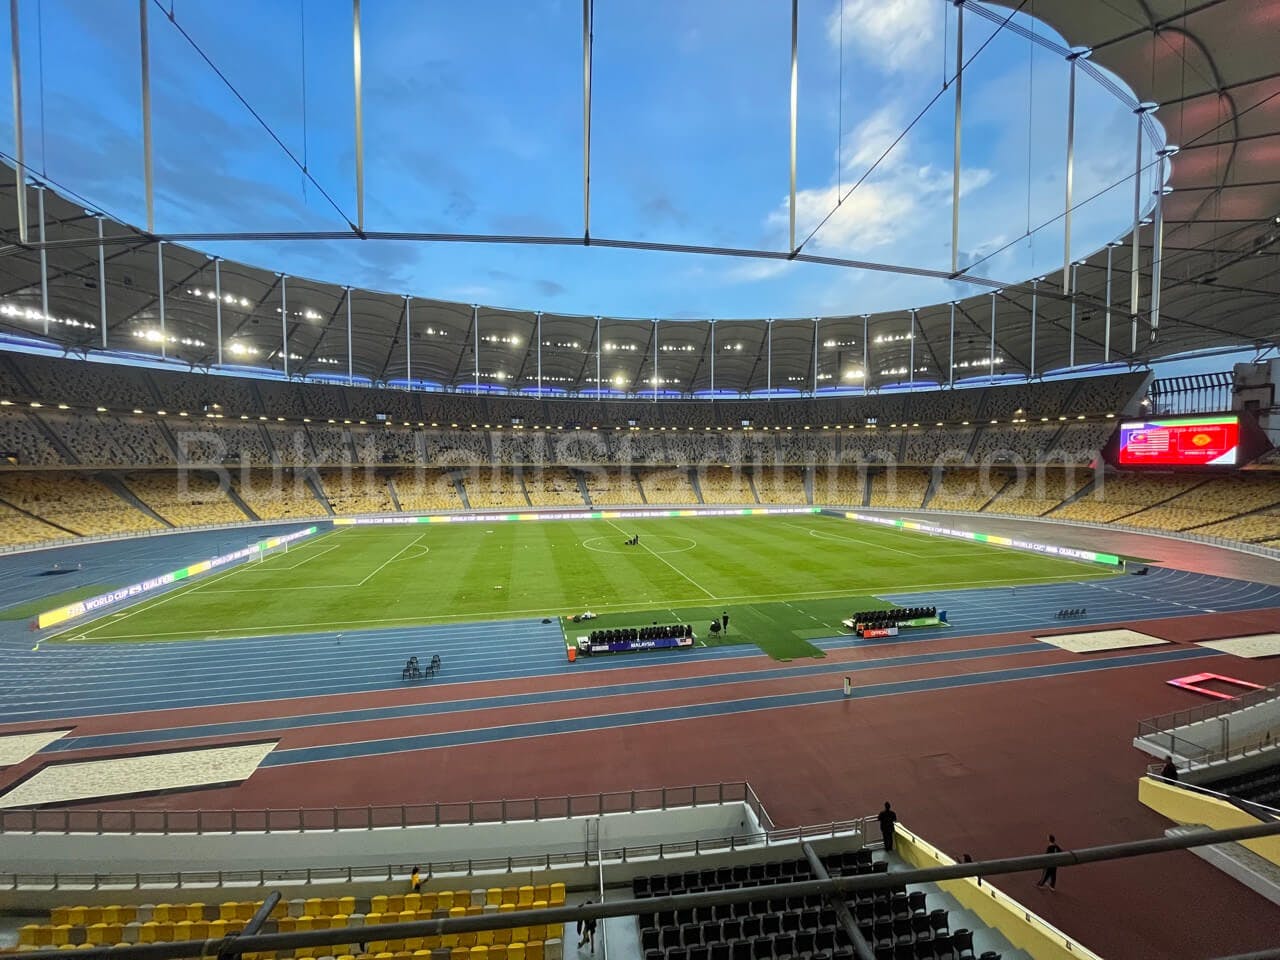 0.5x View of Bukit Jalil field from section 230 of Stadium Bukit Jalil.